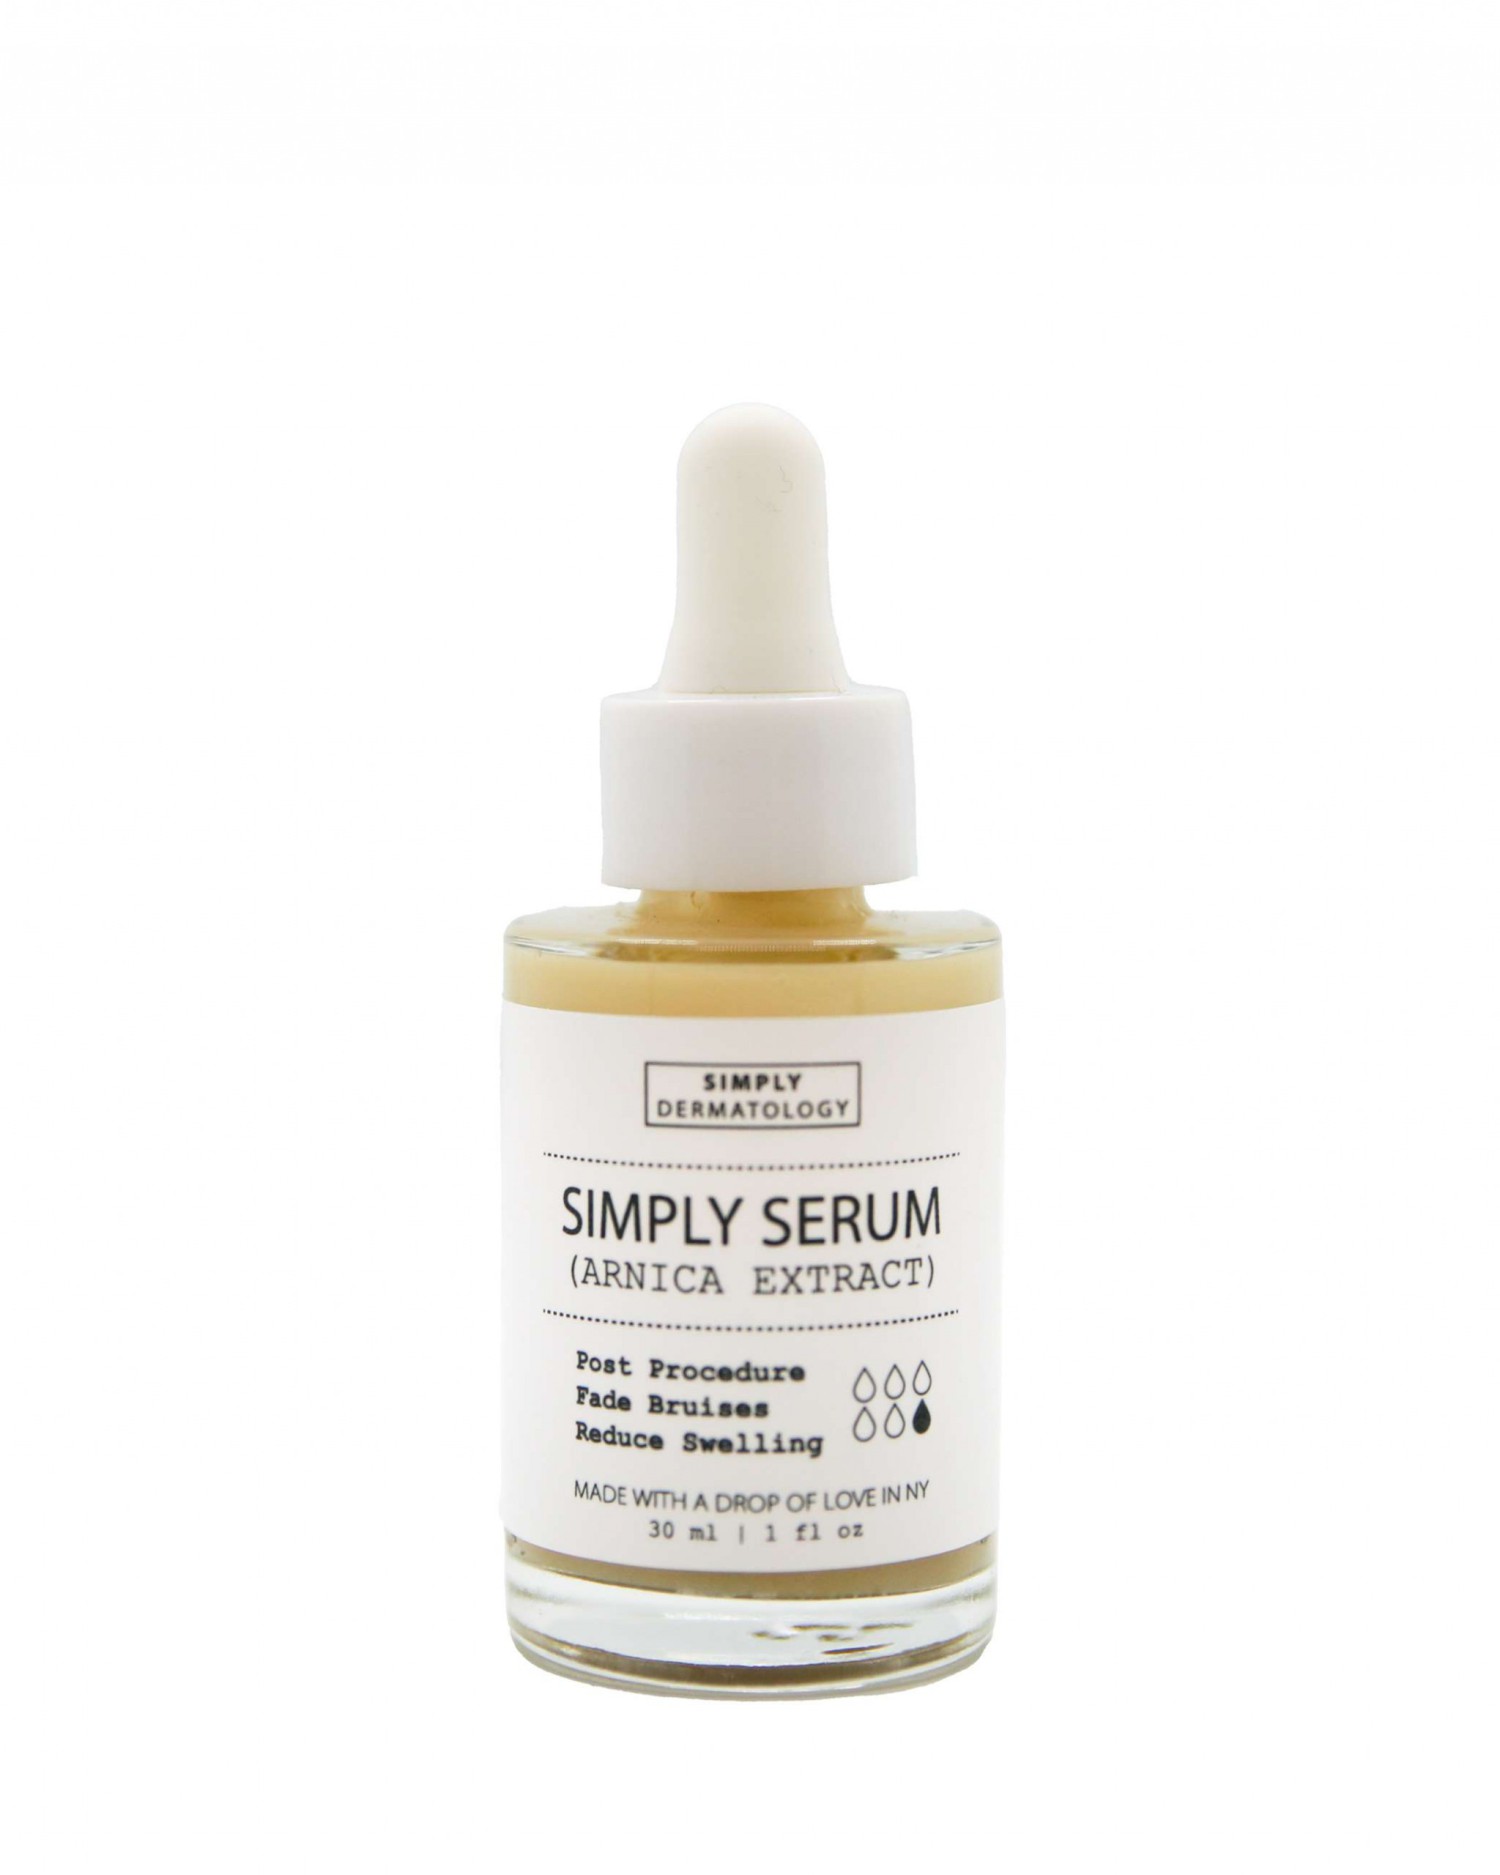 Simply Serum Arnica Extract bottle